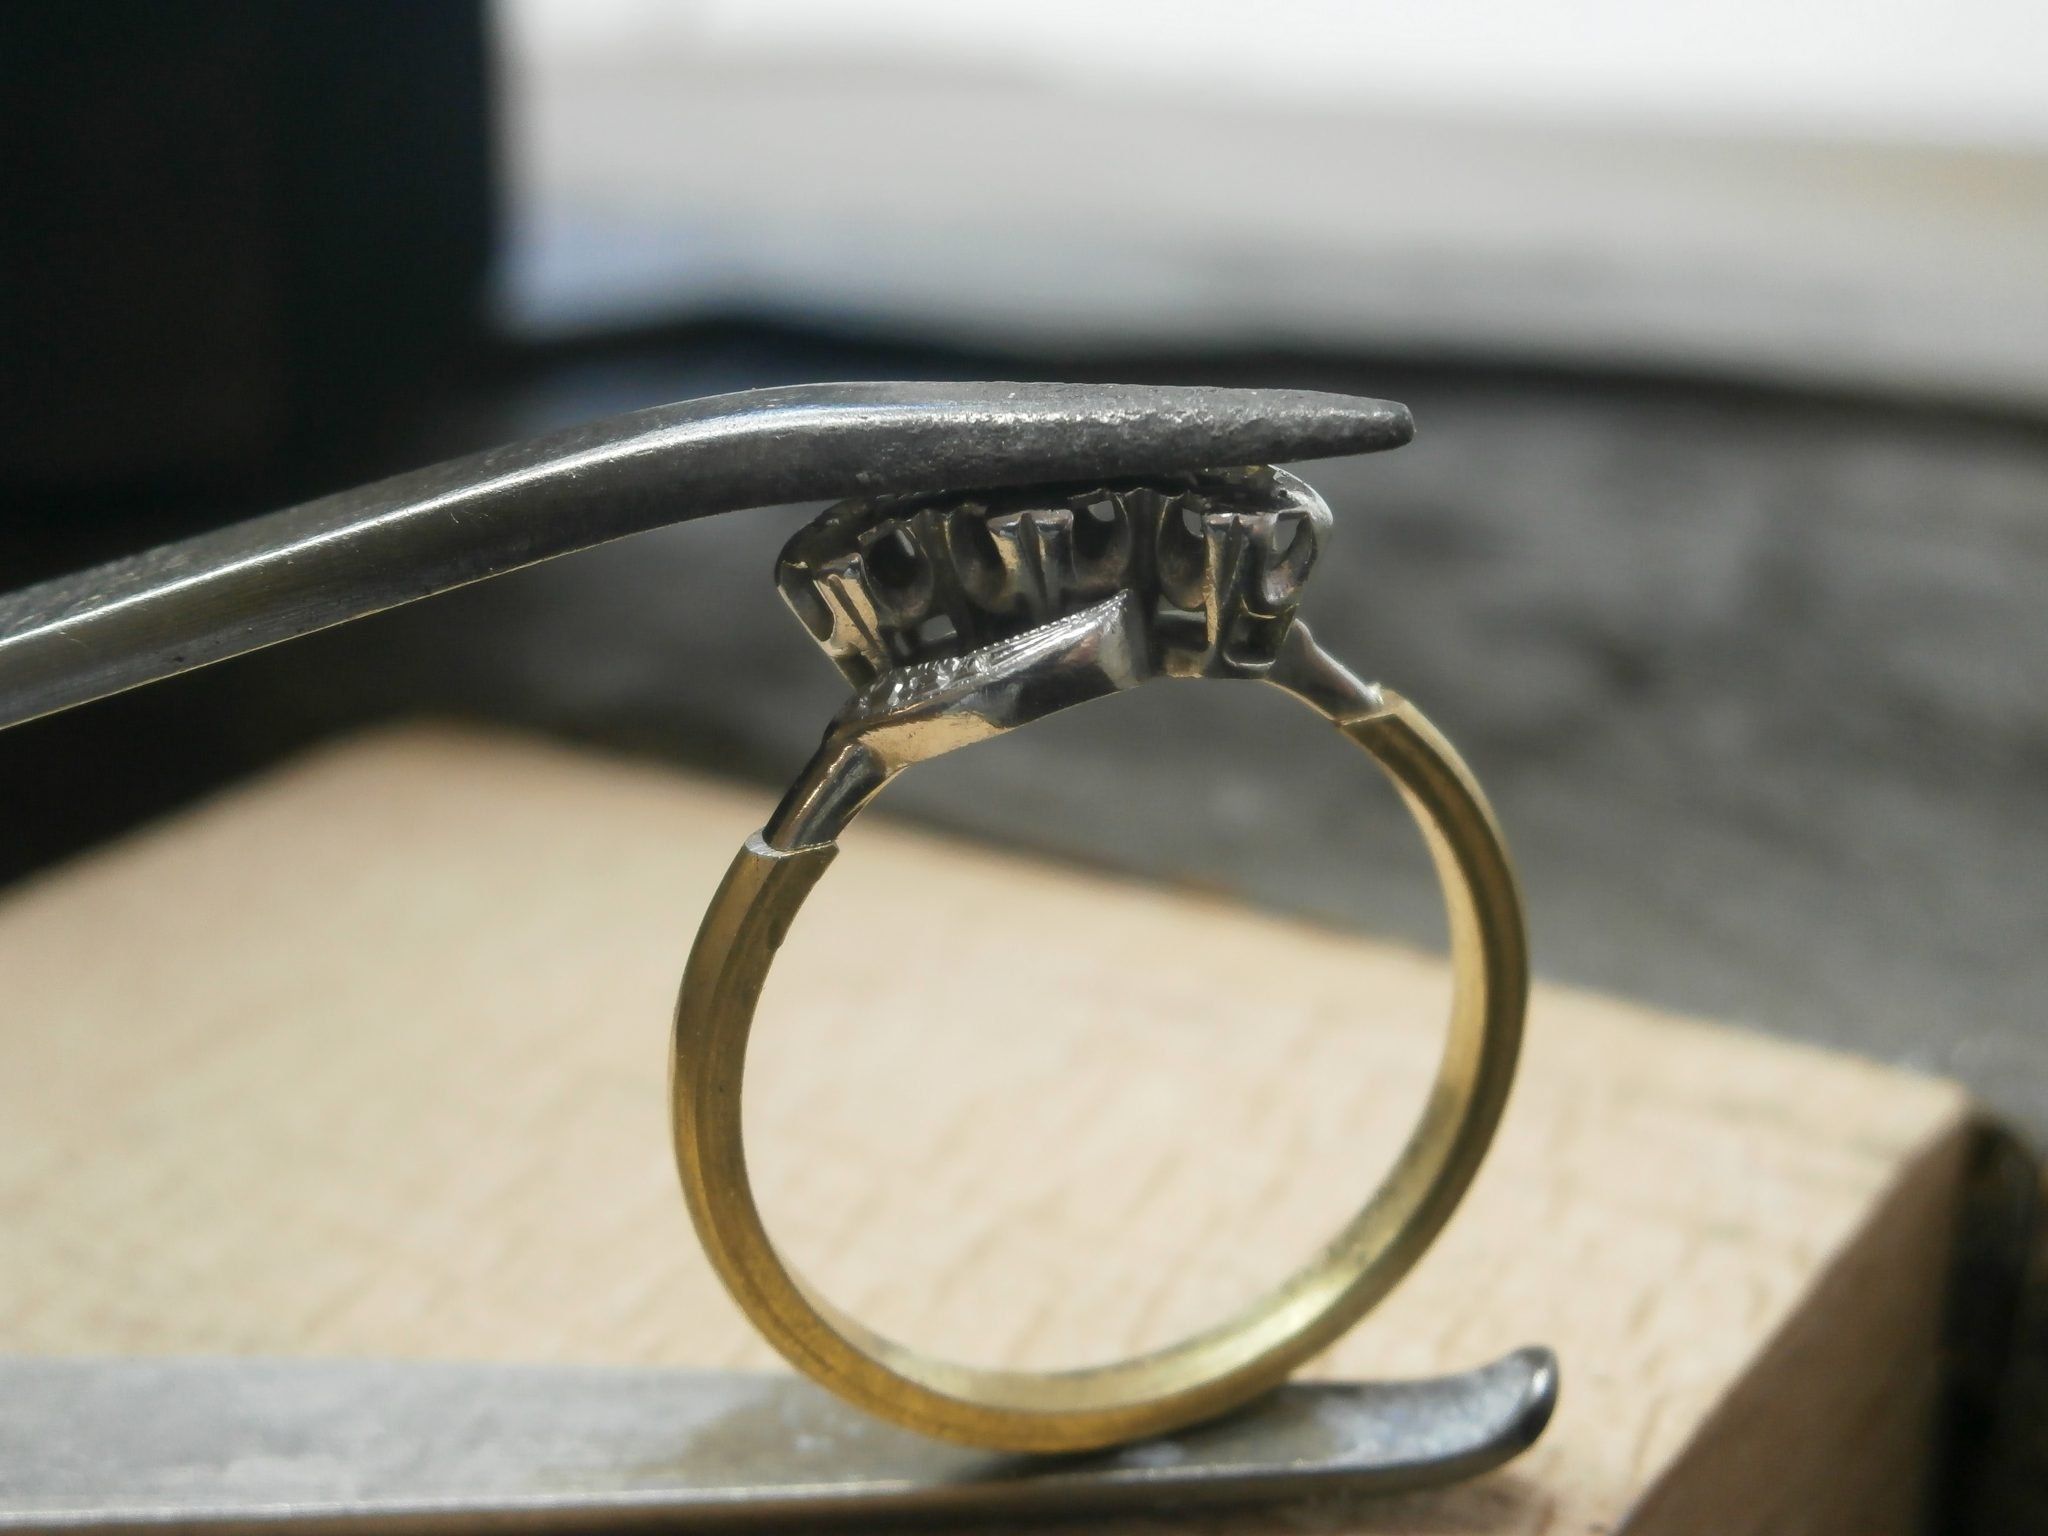 Ring refurbishment - new shank soldered to existing stone setting